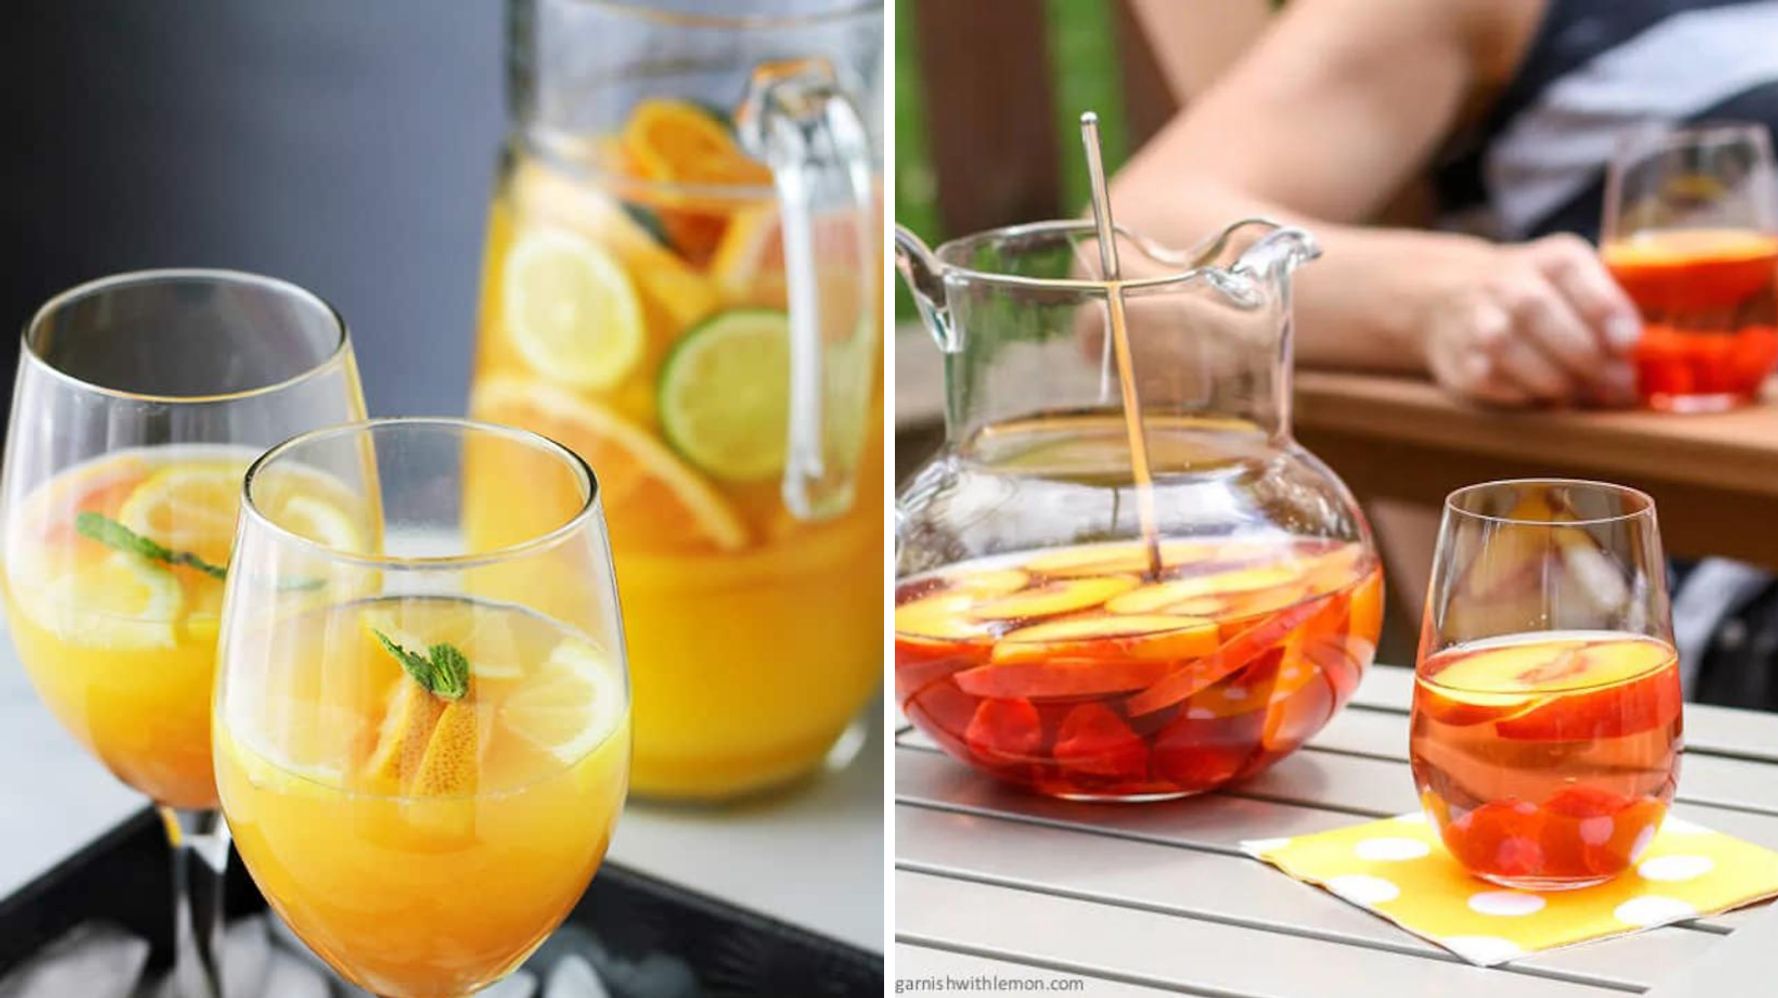 Easy Big Batch Cocktail Recipes for Summer Parties - Best Large Batch Drink  Ideas %%sep%% %%sitename%%